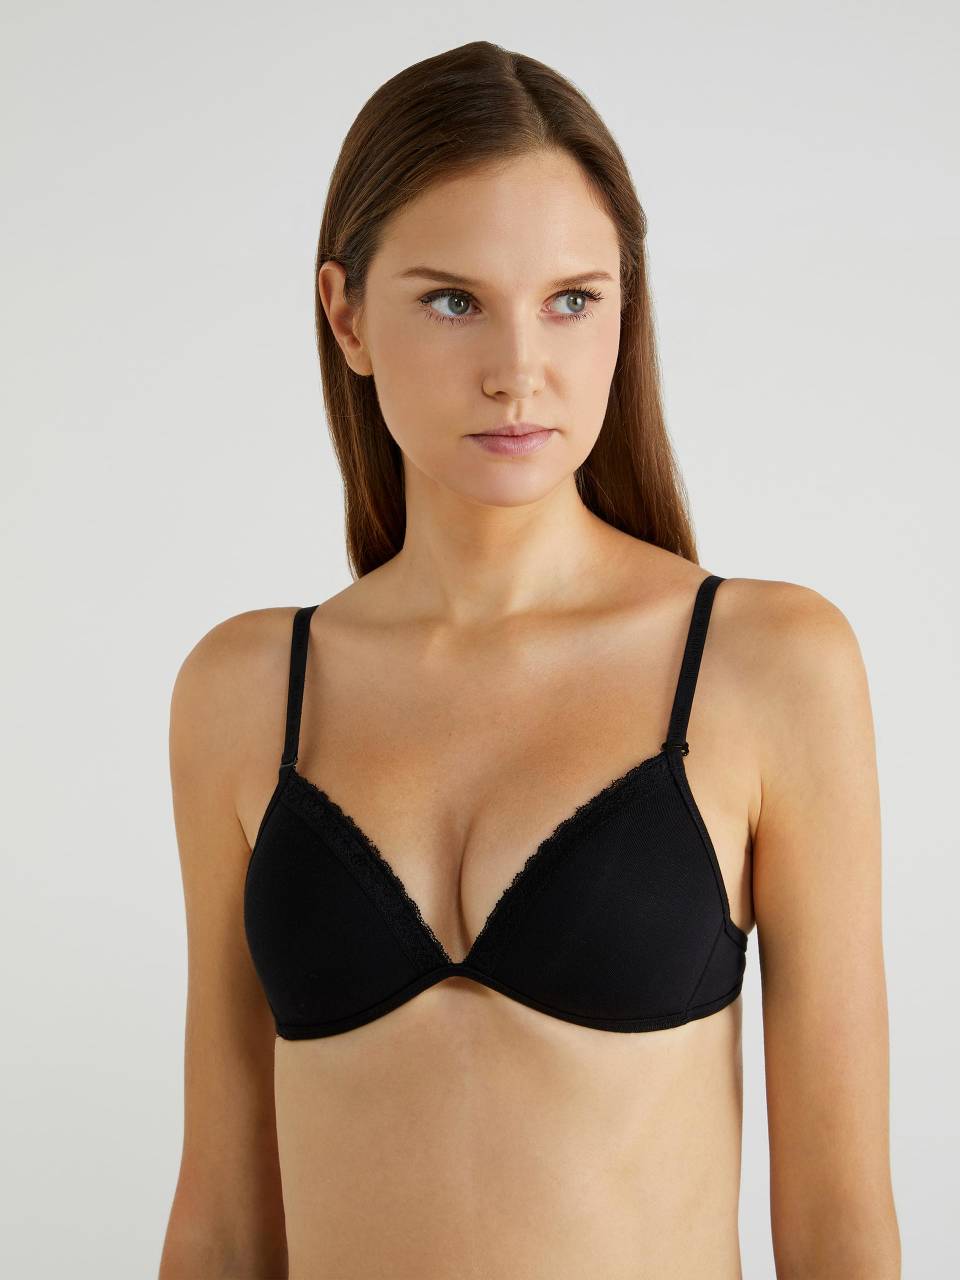 Bras for Medium-Sized Breasts - Cup B